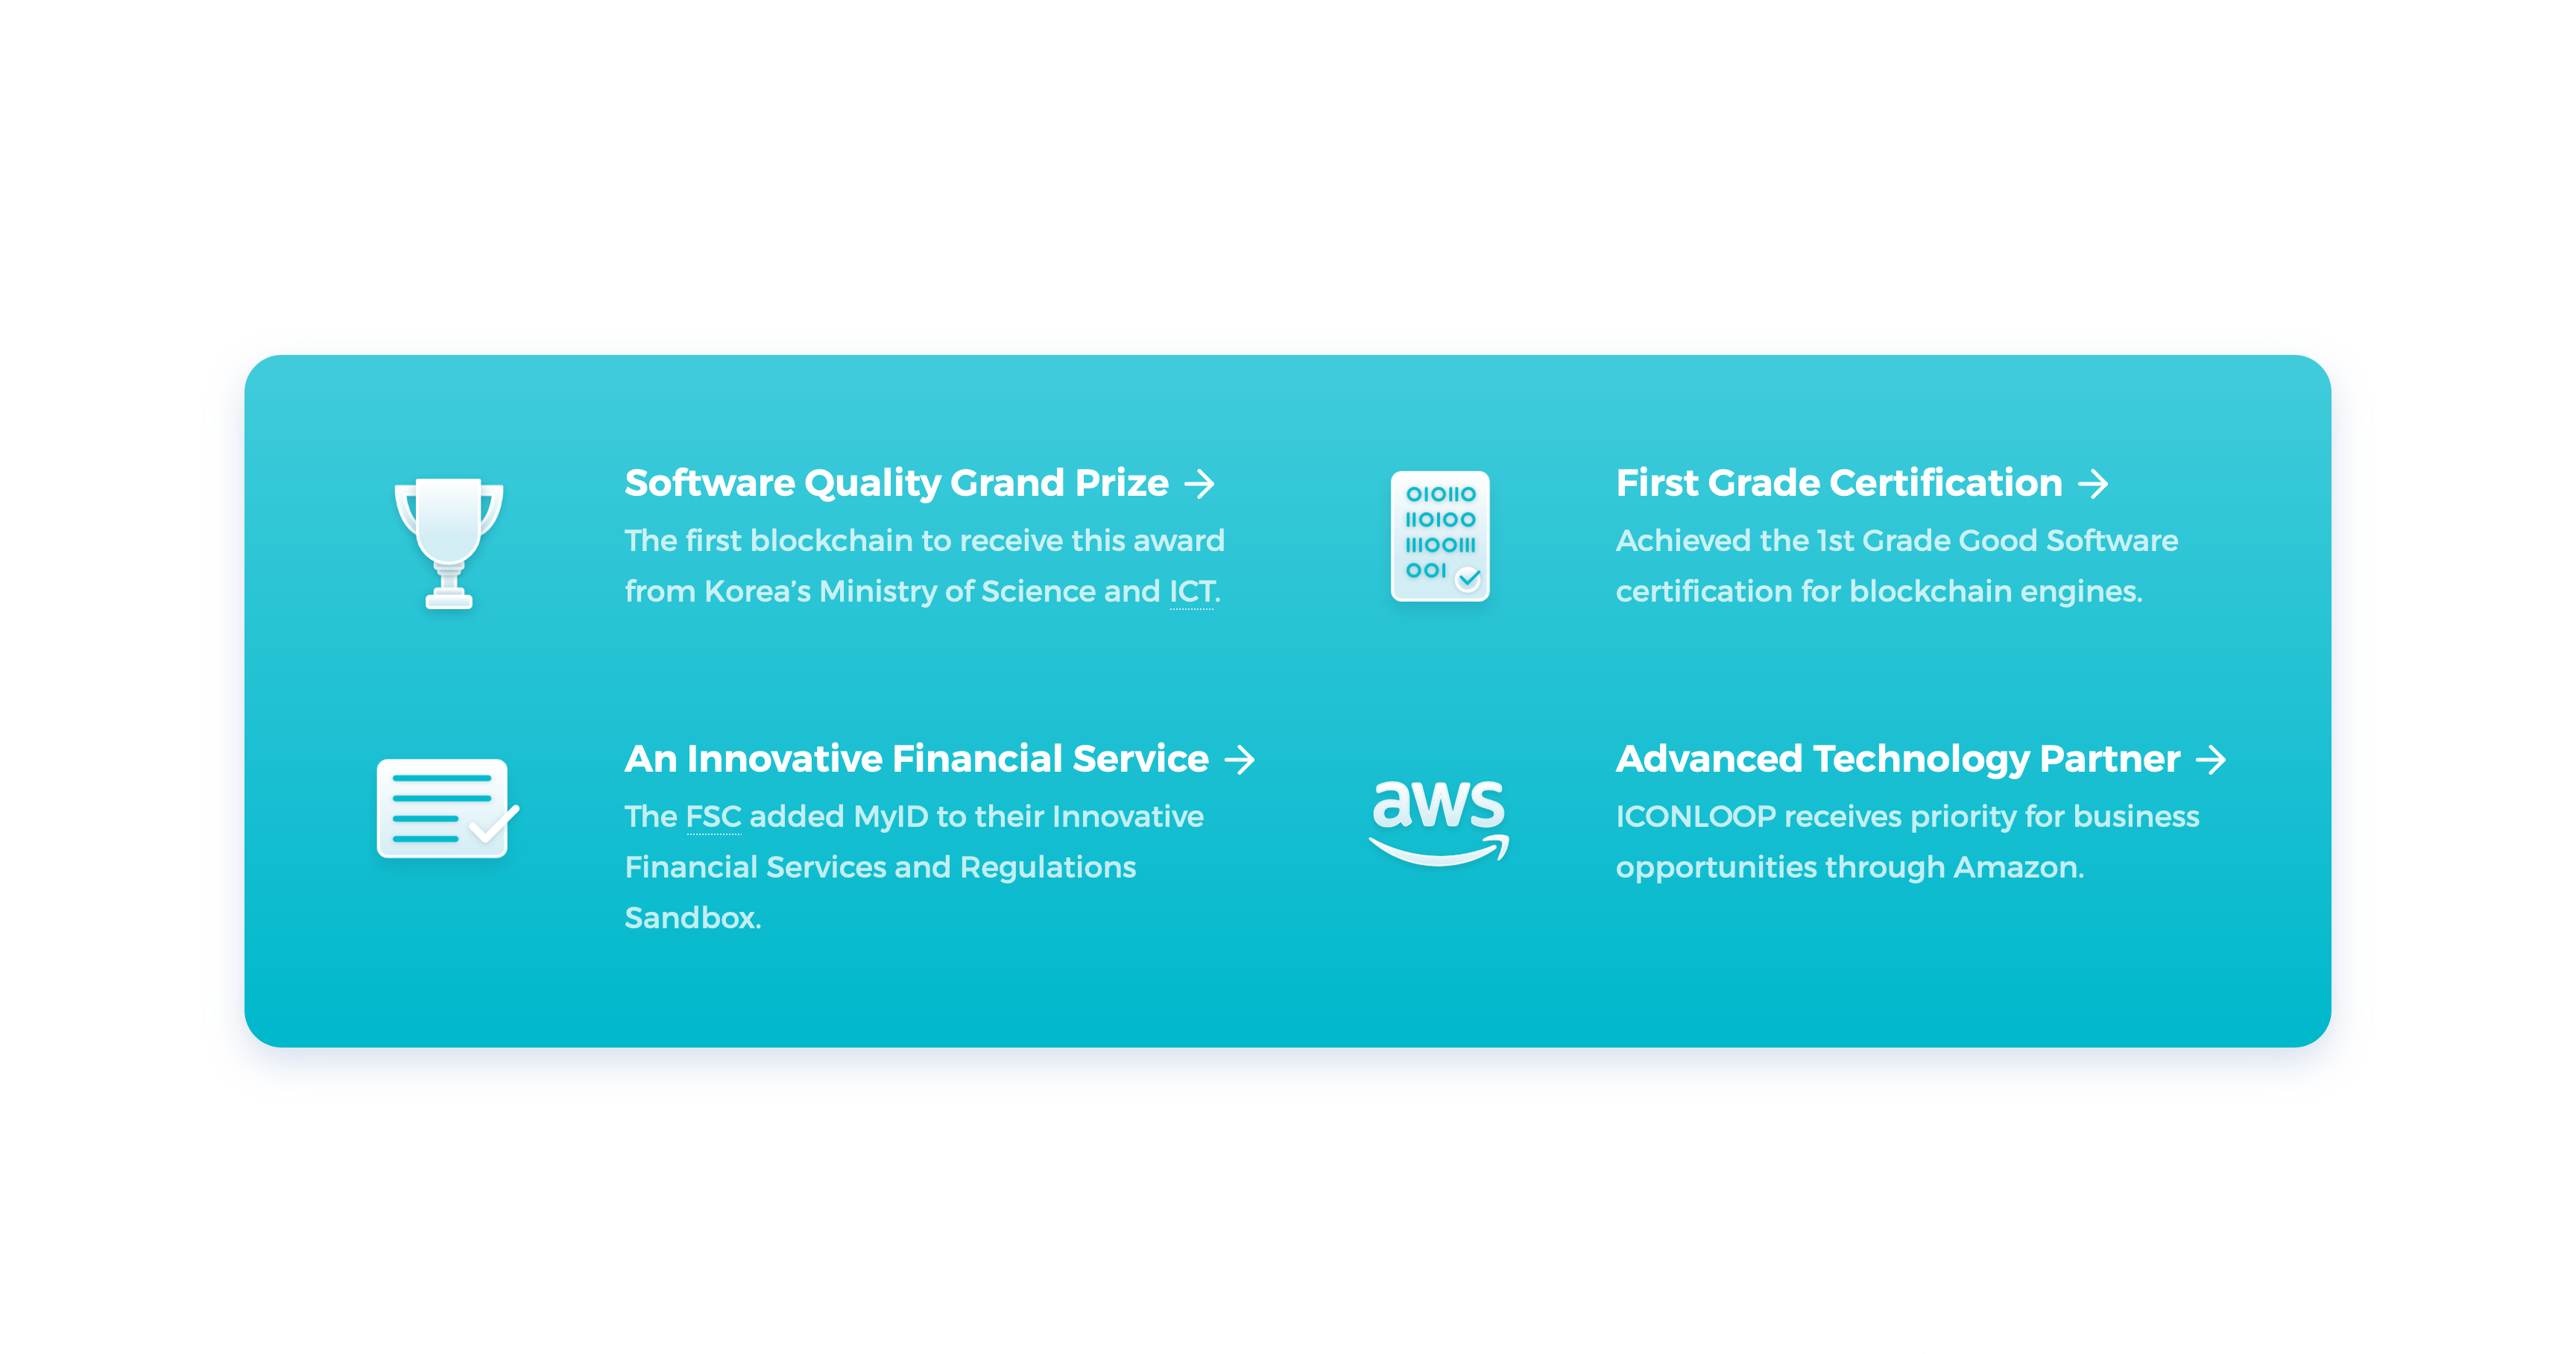 A collection of notable awards and support ICON's enterprise intiatives have received, including the Software Quality Grand Prize from Korea's Ministry of Science and CIT, First Grade Certification from Good Software, and an Amazon Advanced Technology Partner.